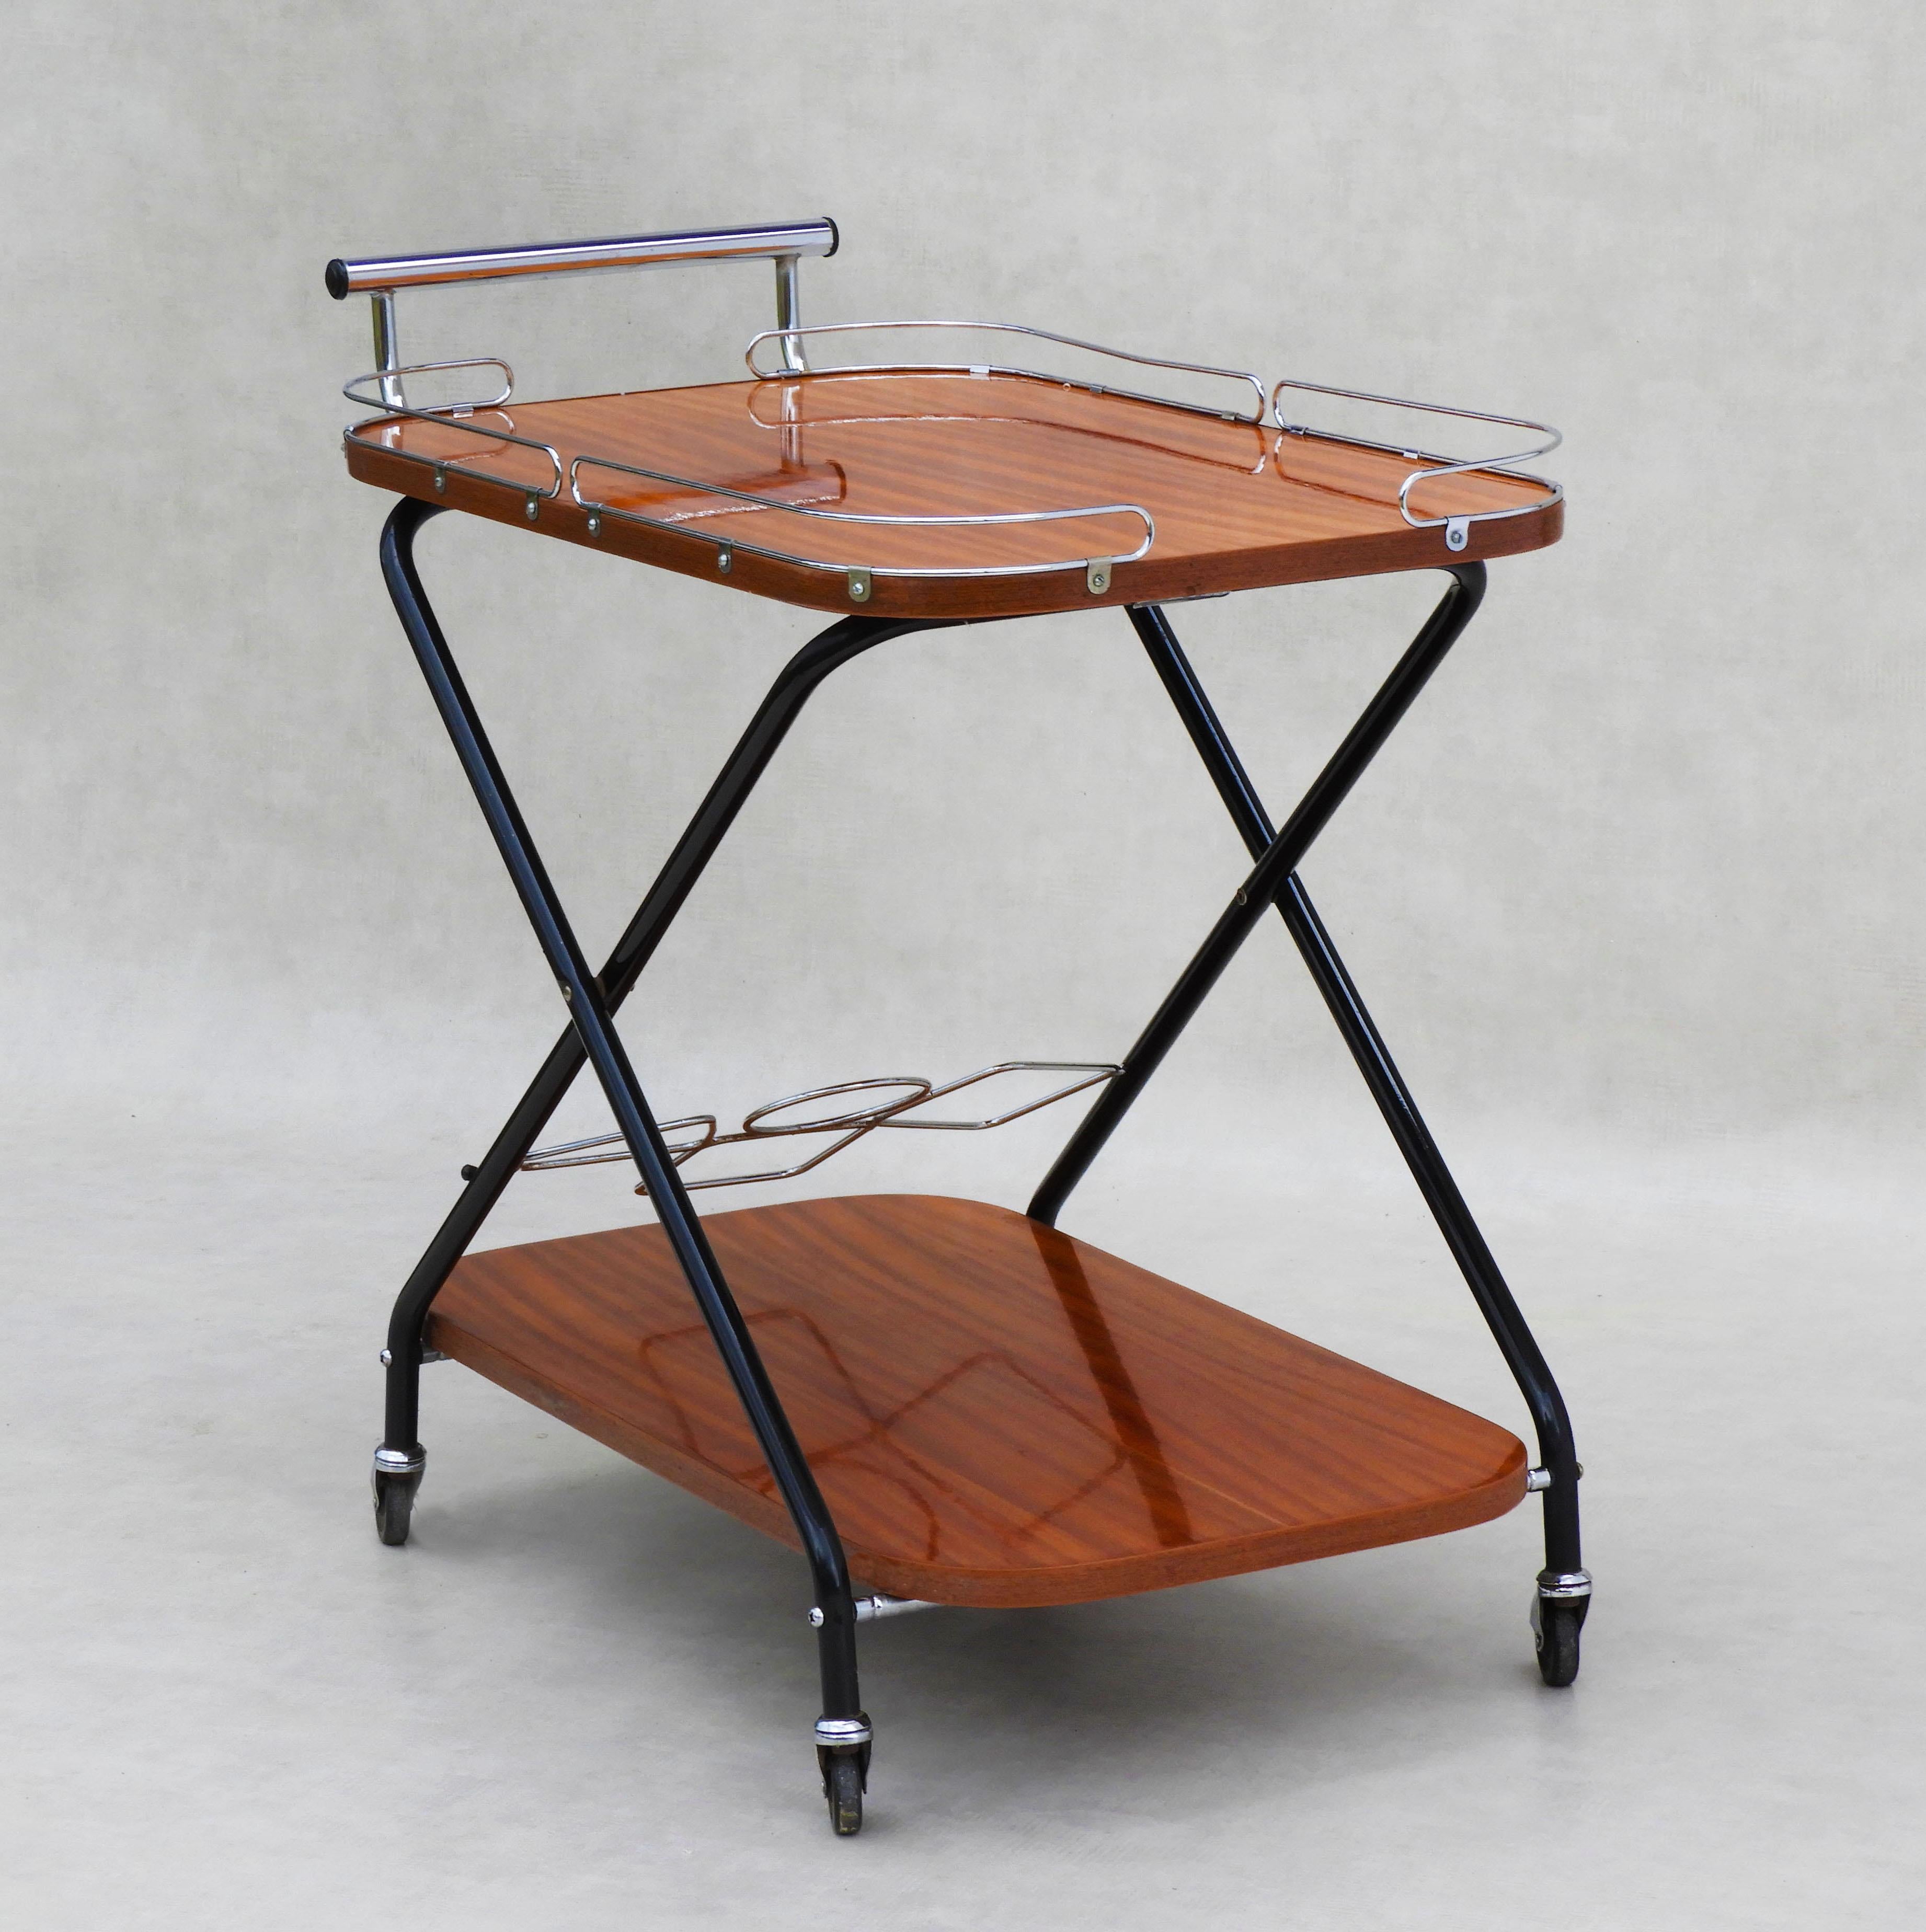 Vintage Mid Century drinks trolley bar cart 1960sFrance

Stylish Mid Century Modern French Hostess Trolley.

Two tiered folding drinks trolley, bar cart, serving table.

High gloss teak surface, chrome detailing.

Practical, solid and